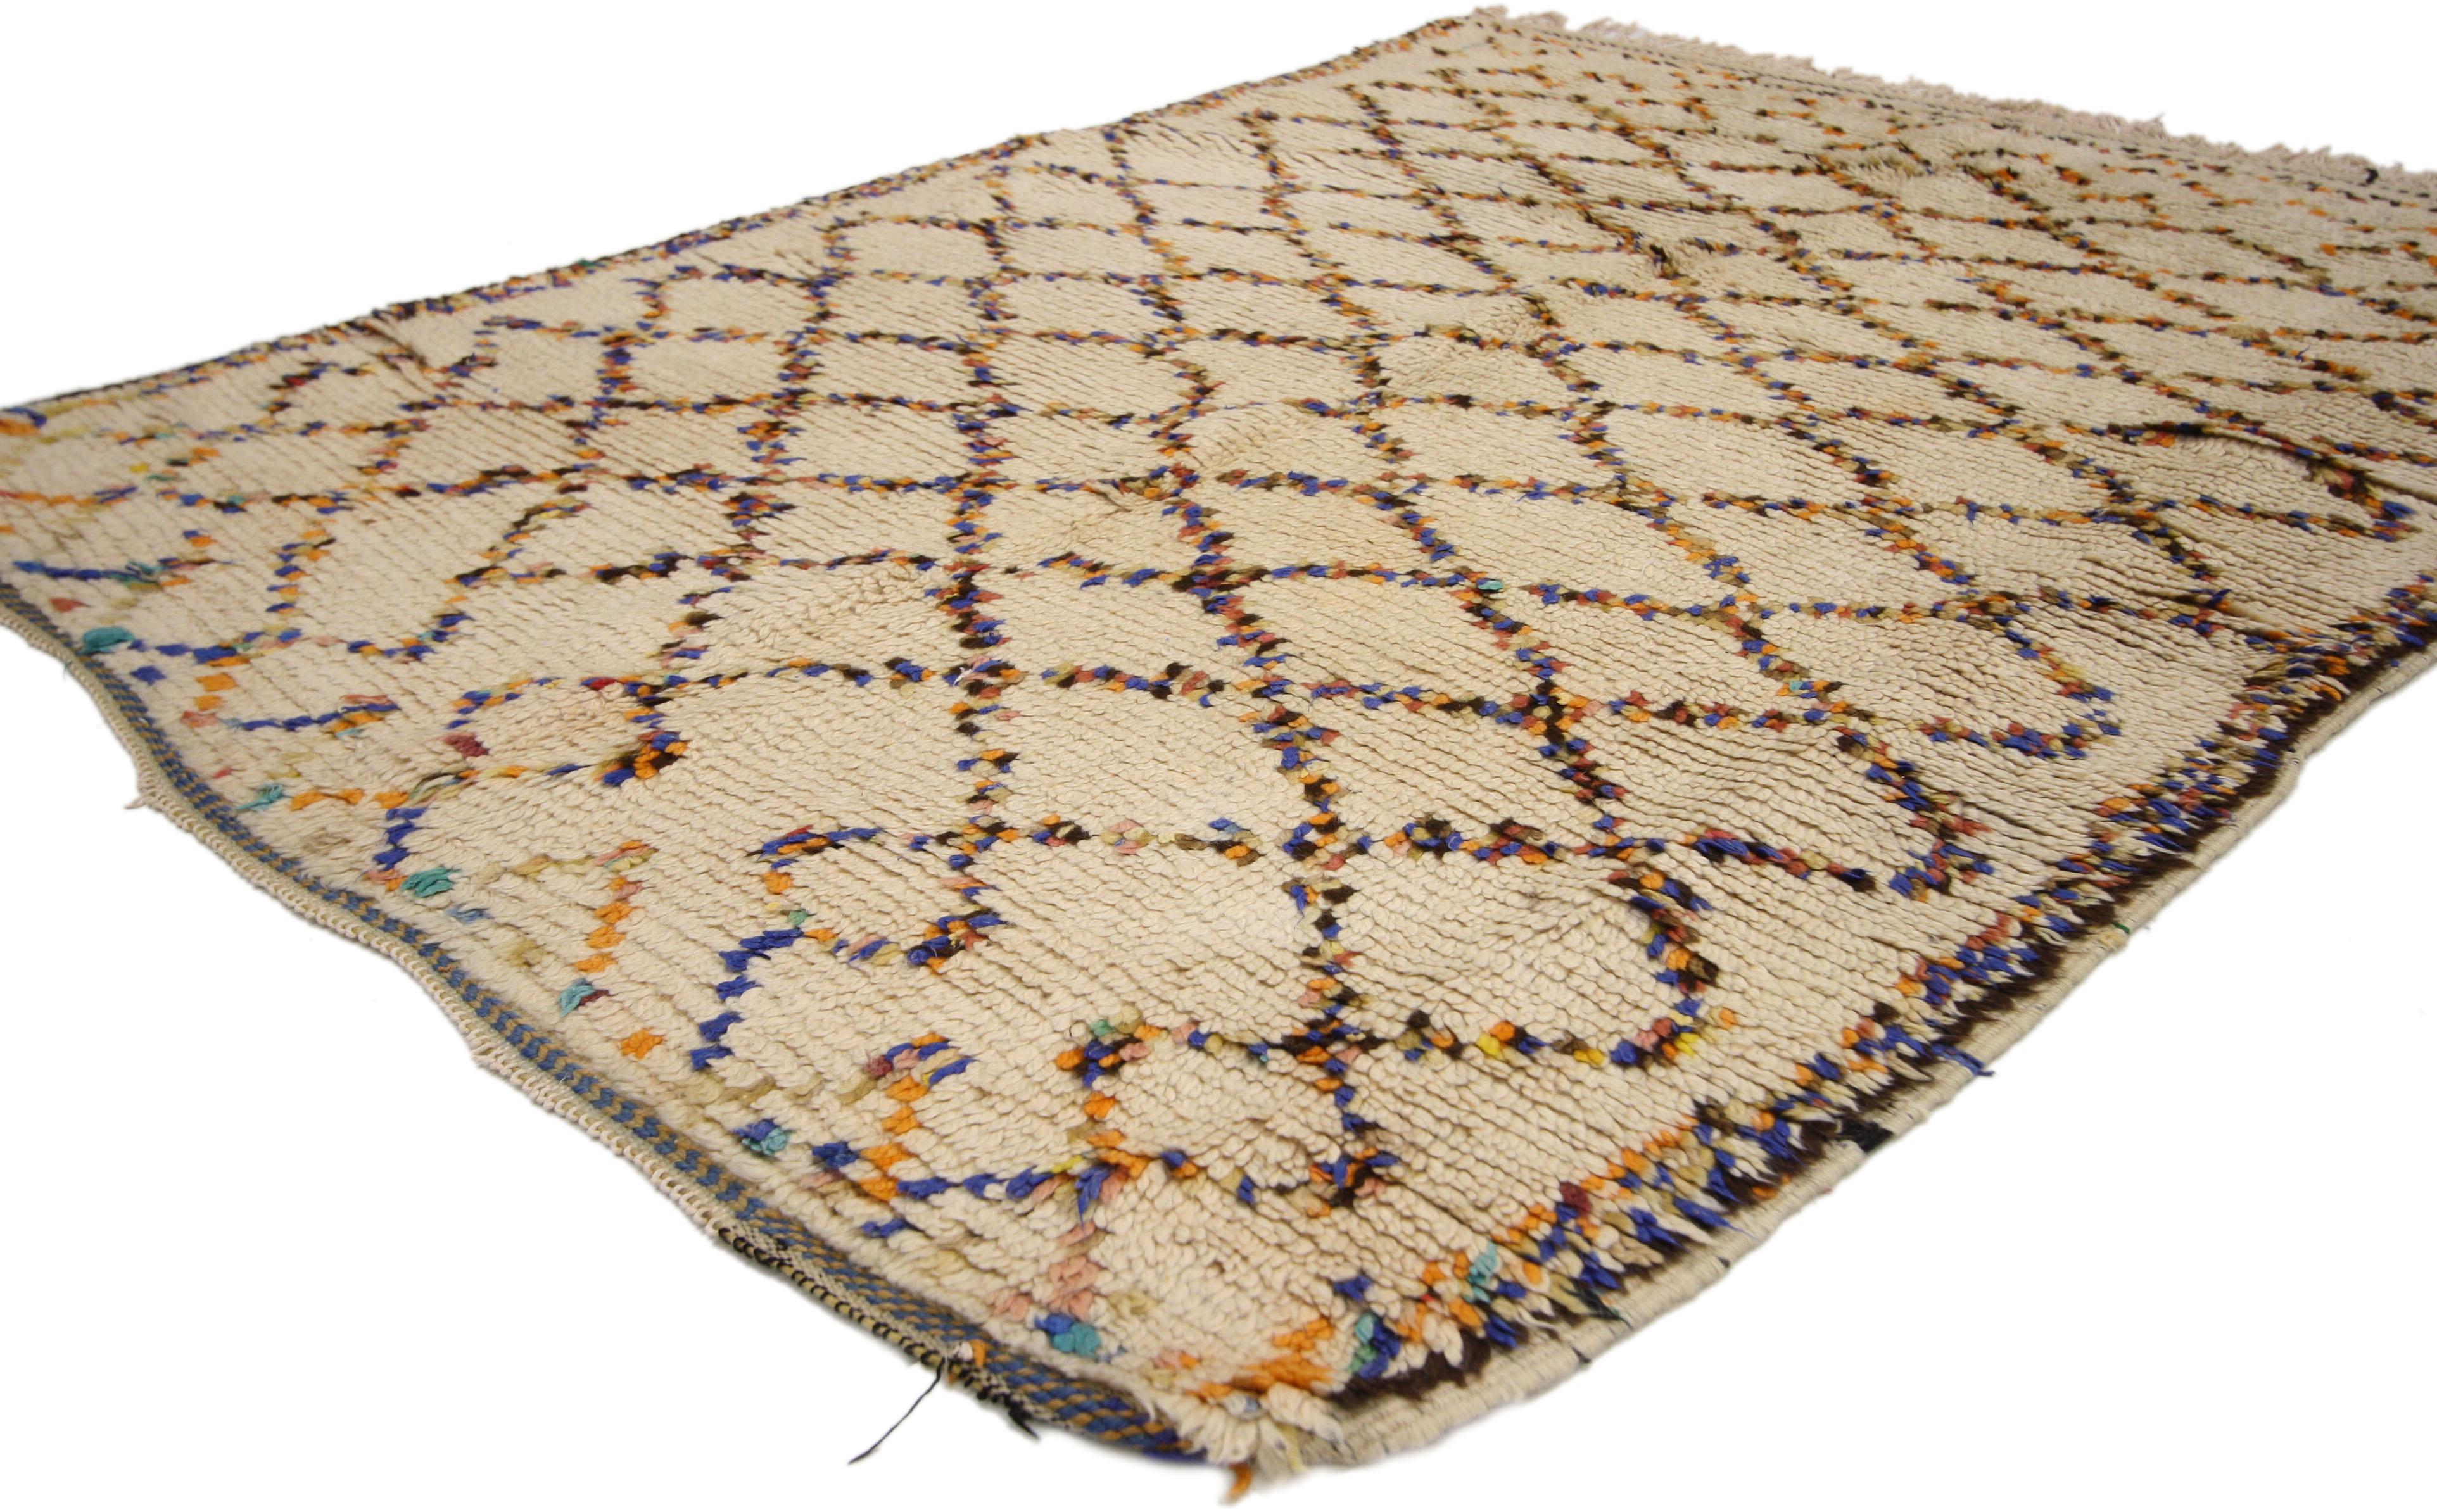 74545 vintage Berber Moroccan Azilal rug with Tribal style, colorful Moroccan rug. A creamy beige field with colorful lines creates an eccentric lozenge trellis pattern that can perfectly tie together eclectic interiors. This subtle rainbow and